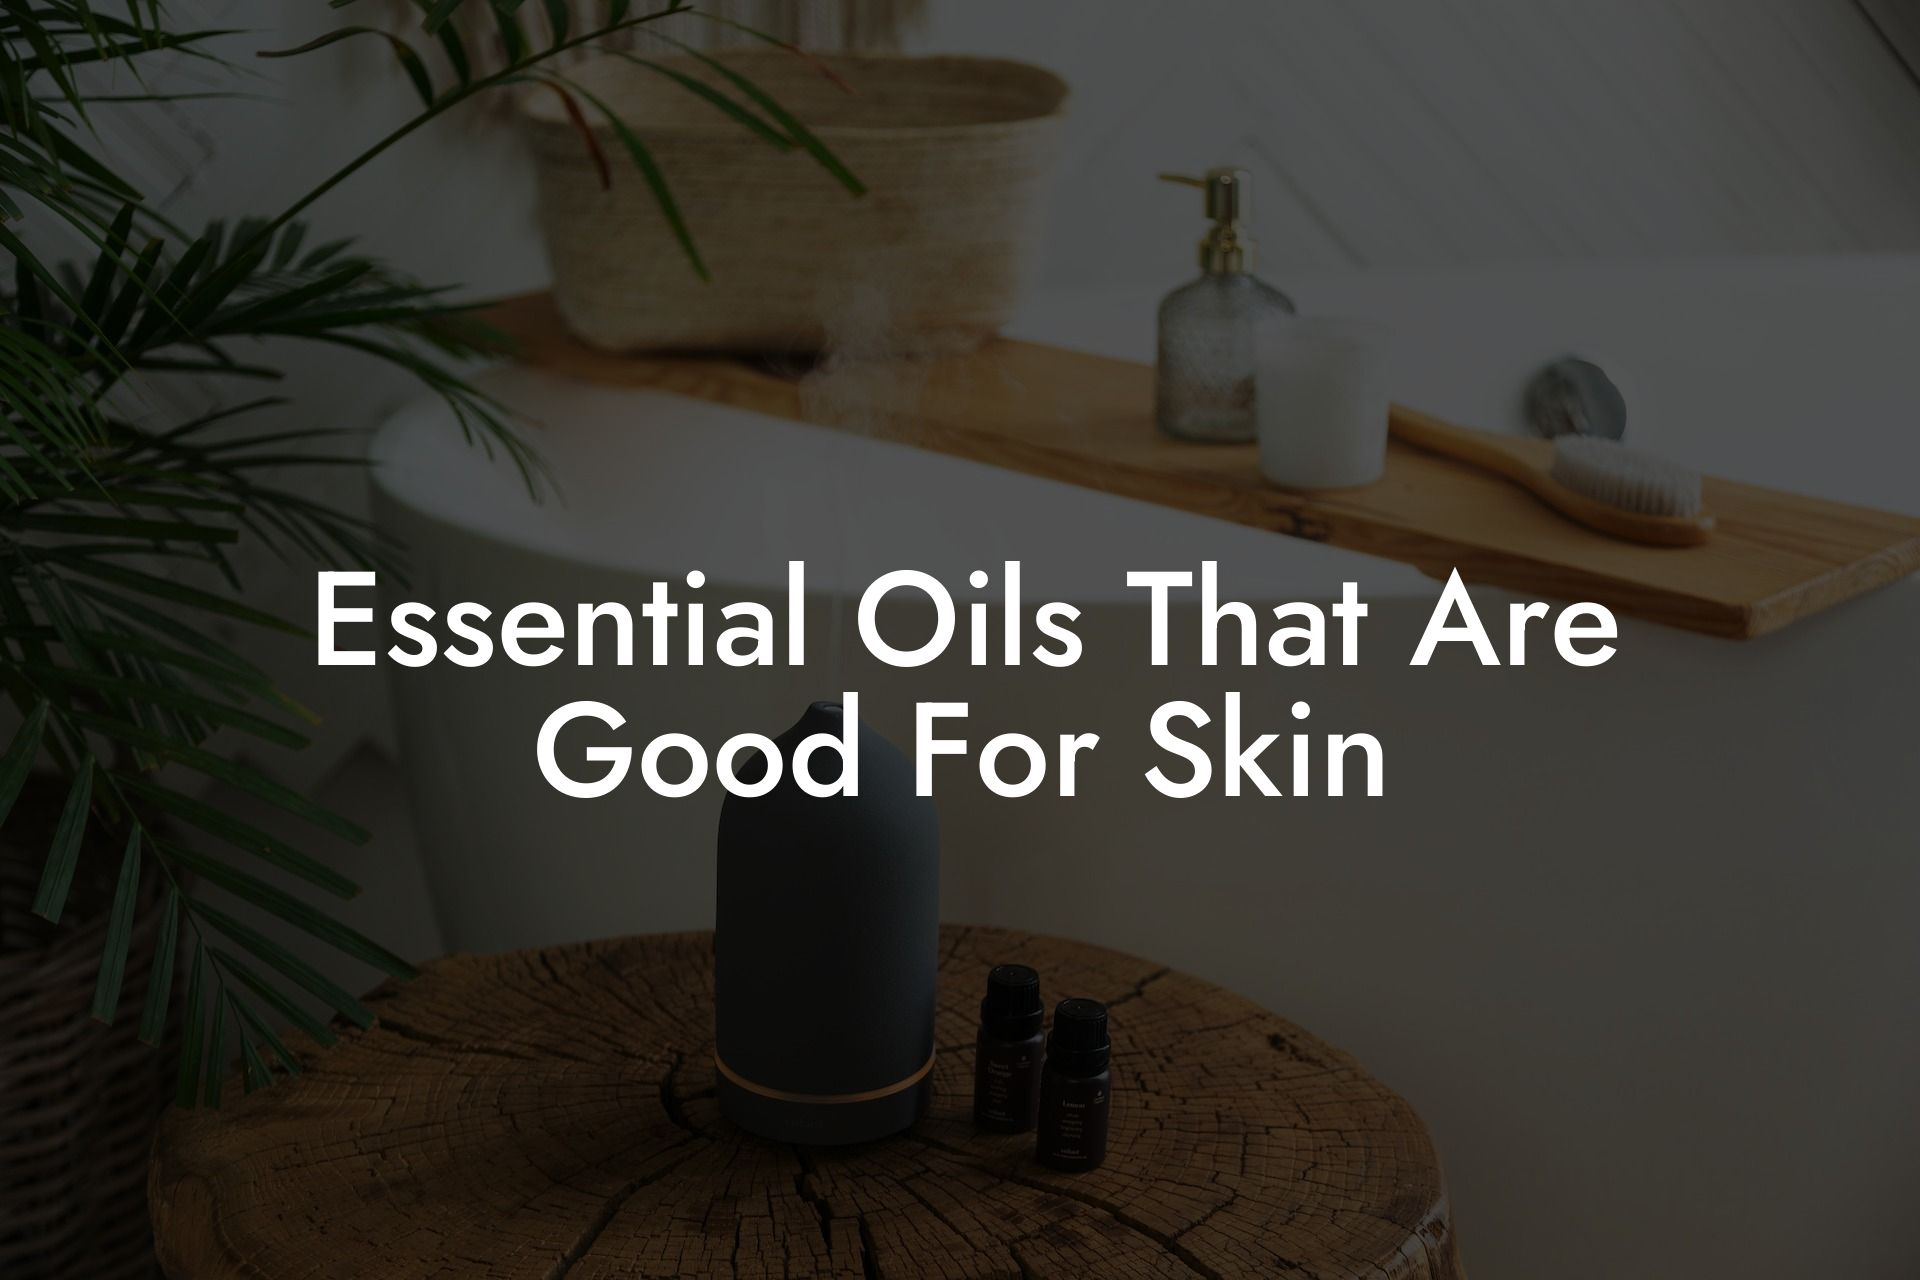 Essential Oils That Are Good For Skin